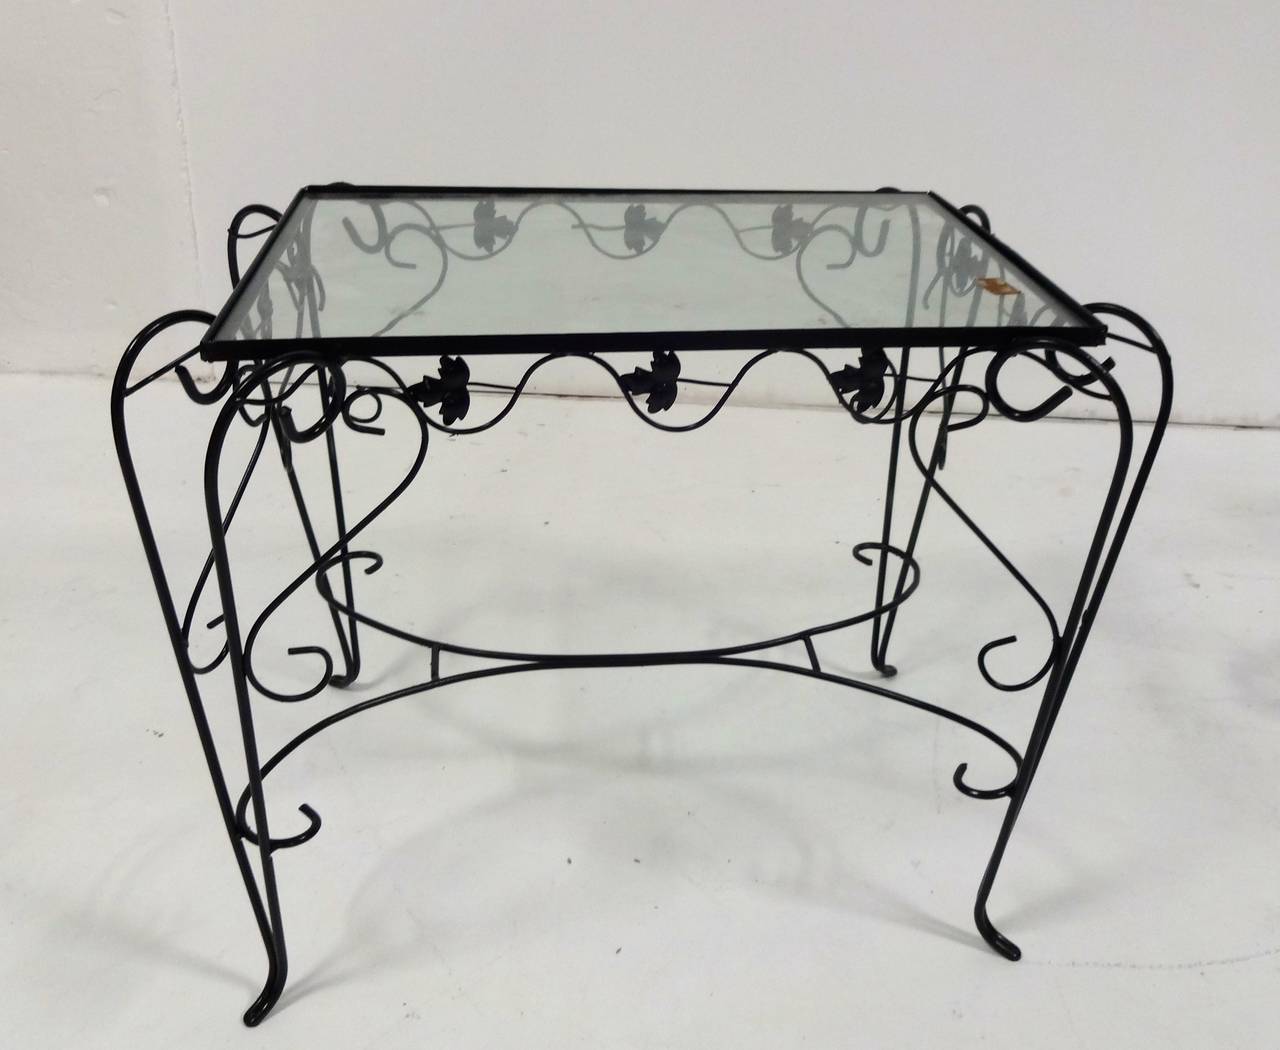 A wrought iron outdoor garden set comprising one rectangular table w/glass top (can accommodate a larger glass top) and four arm chairs with scrolling foliate motif painted black.  Cushions are not included. (Table measures 35